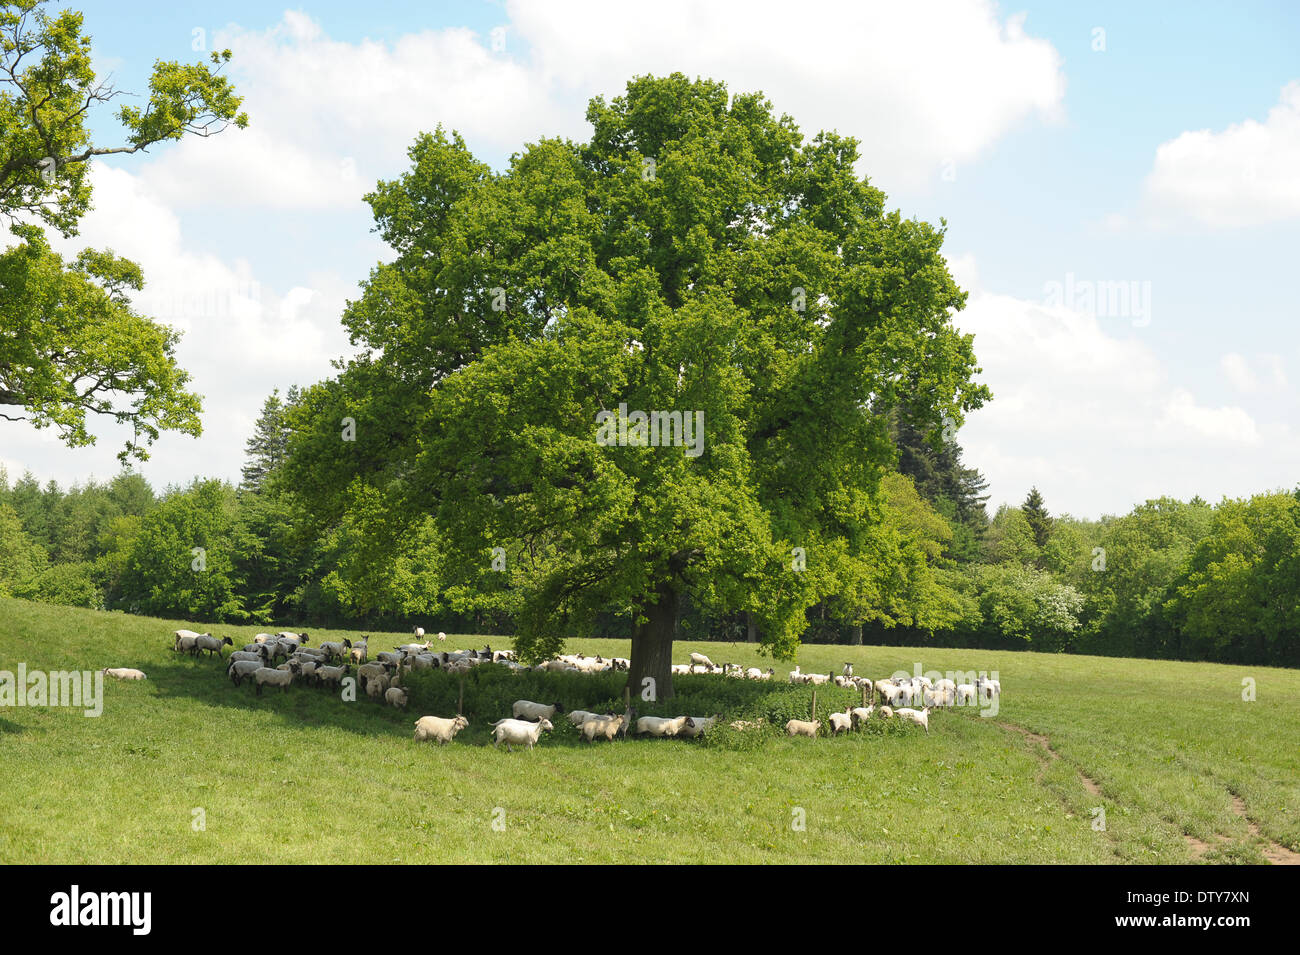 Sheep around tree in a field in Welsh countryside Stock Photo